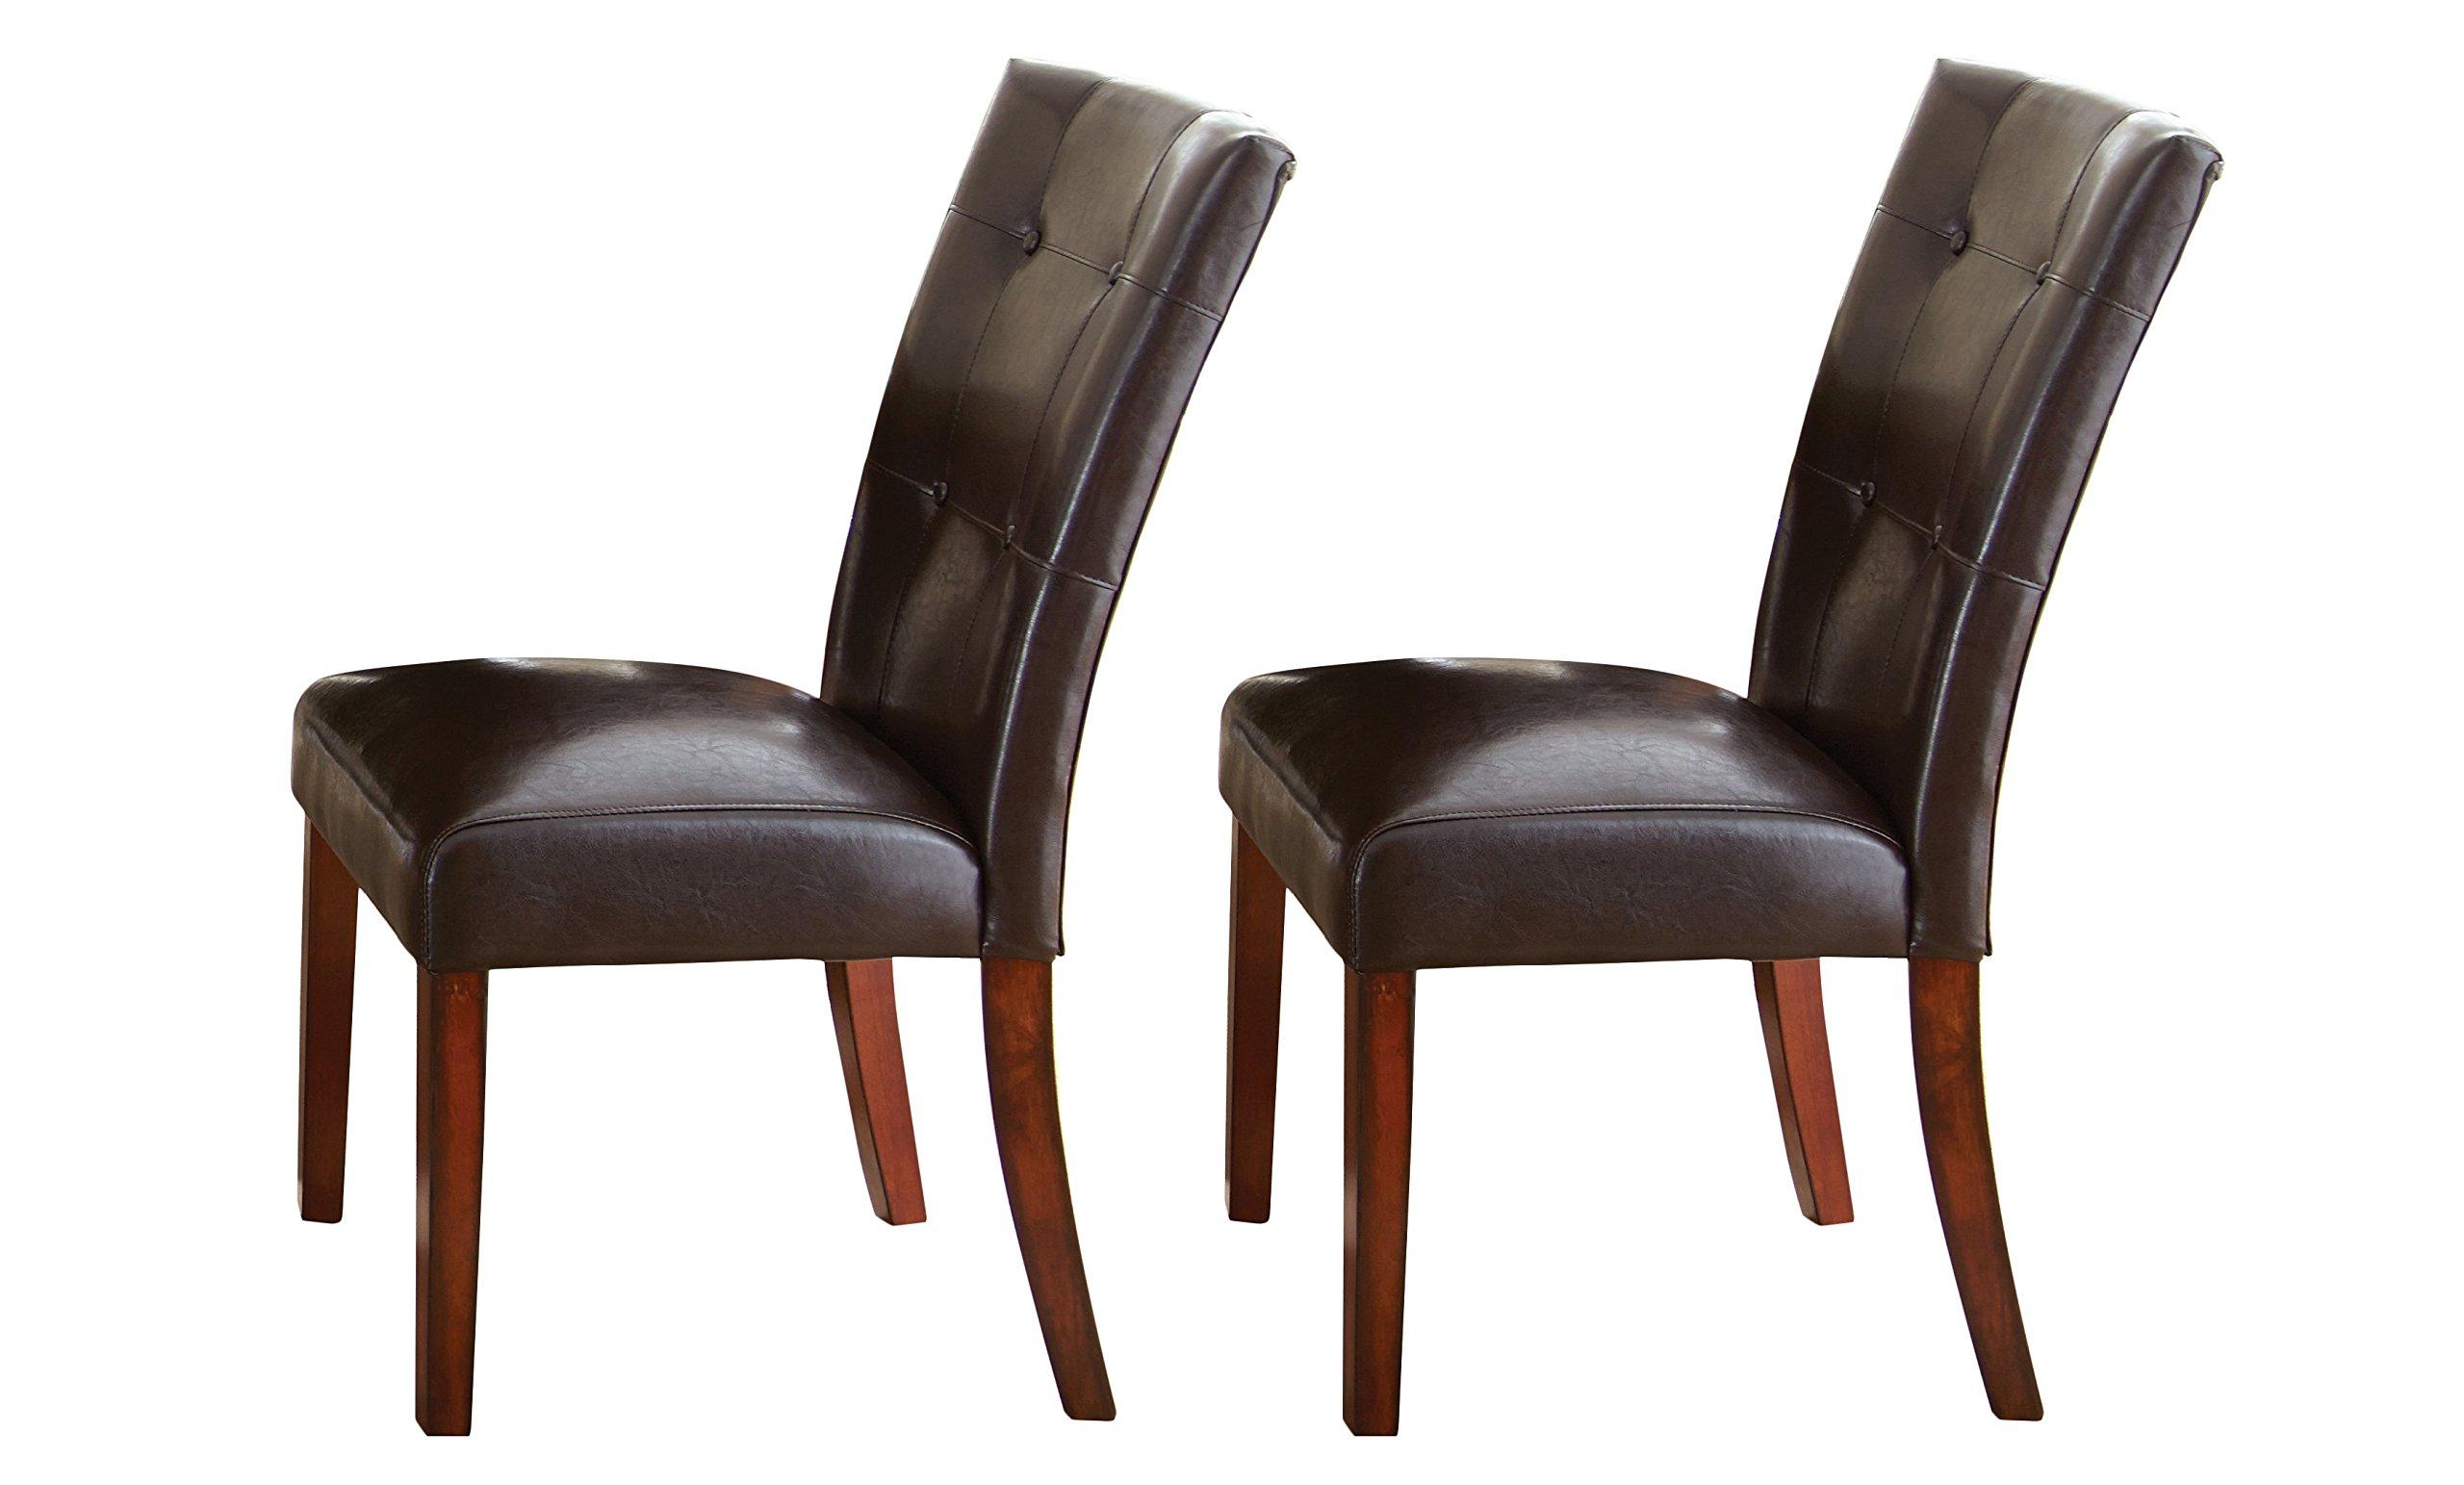 Transitional Dining Chair Set Britney 07054-2pcs in Espresso PU